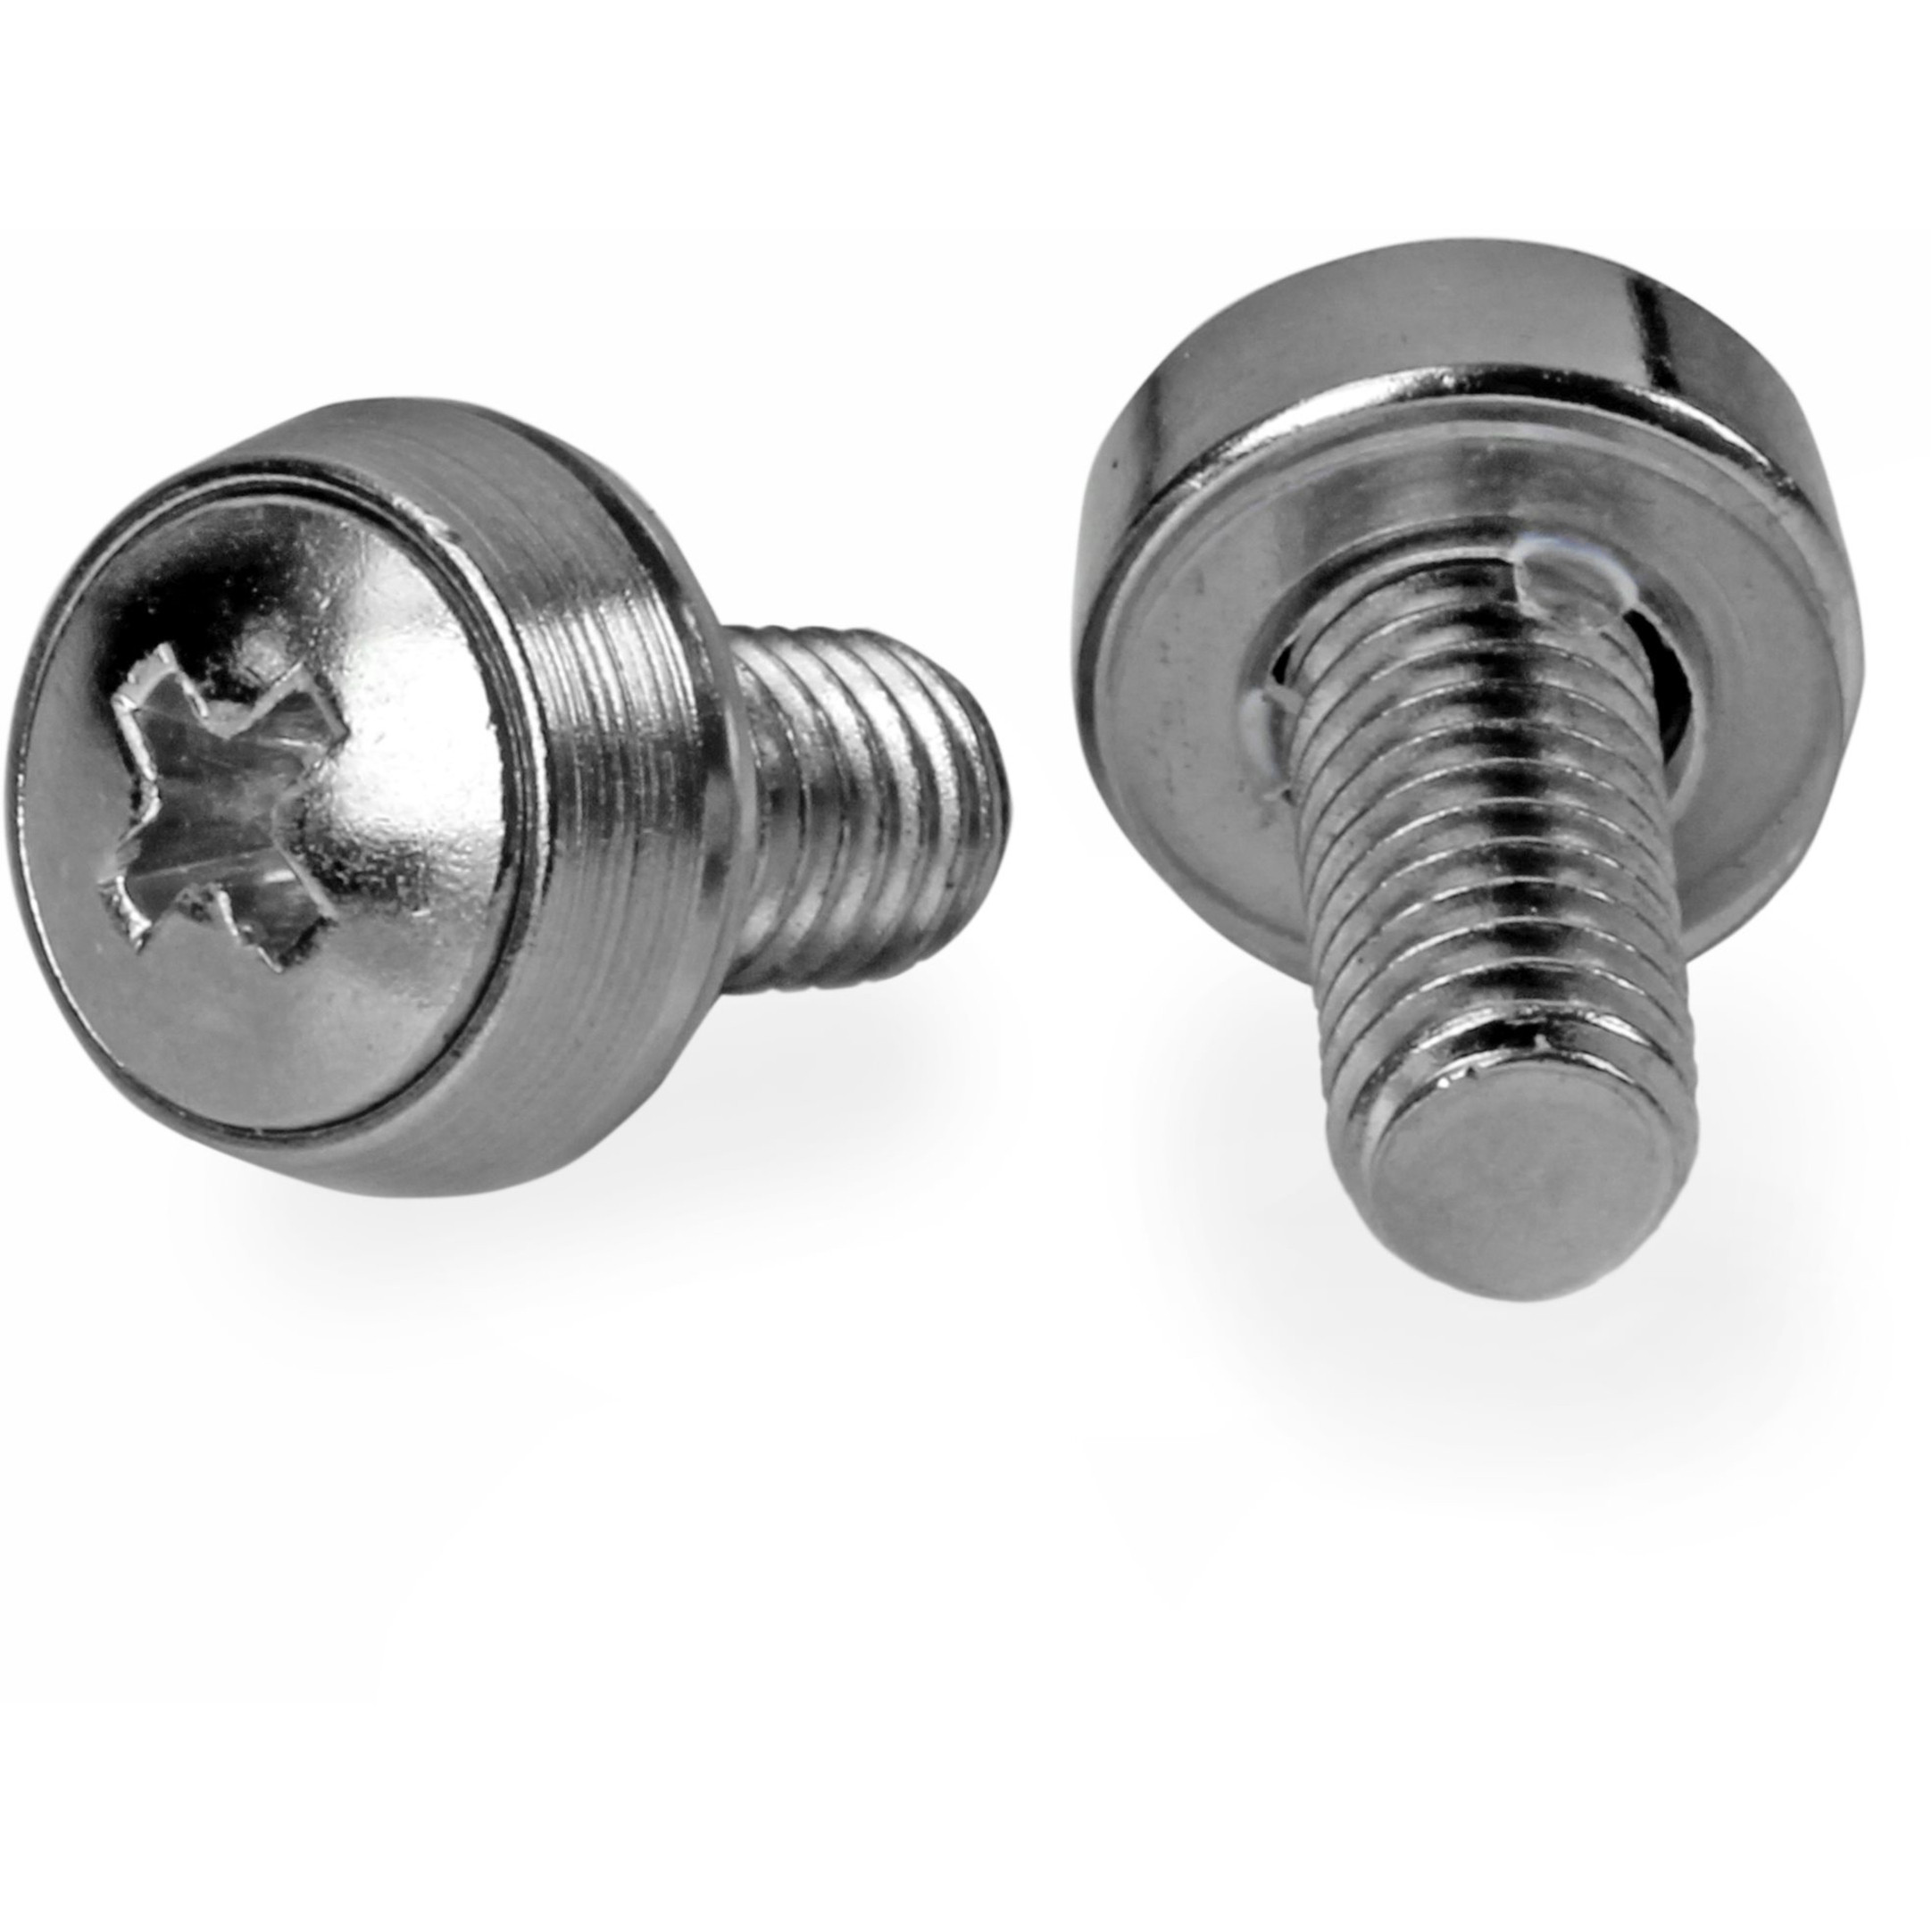 Startech .com M6 x 12mmScrews100 PackM6 Mounting Screws for Server Rack & CabinetInstall your rack-mountable hardware securely w… CABSCREWSM62